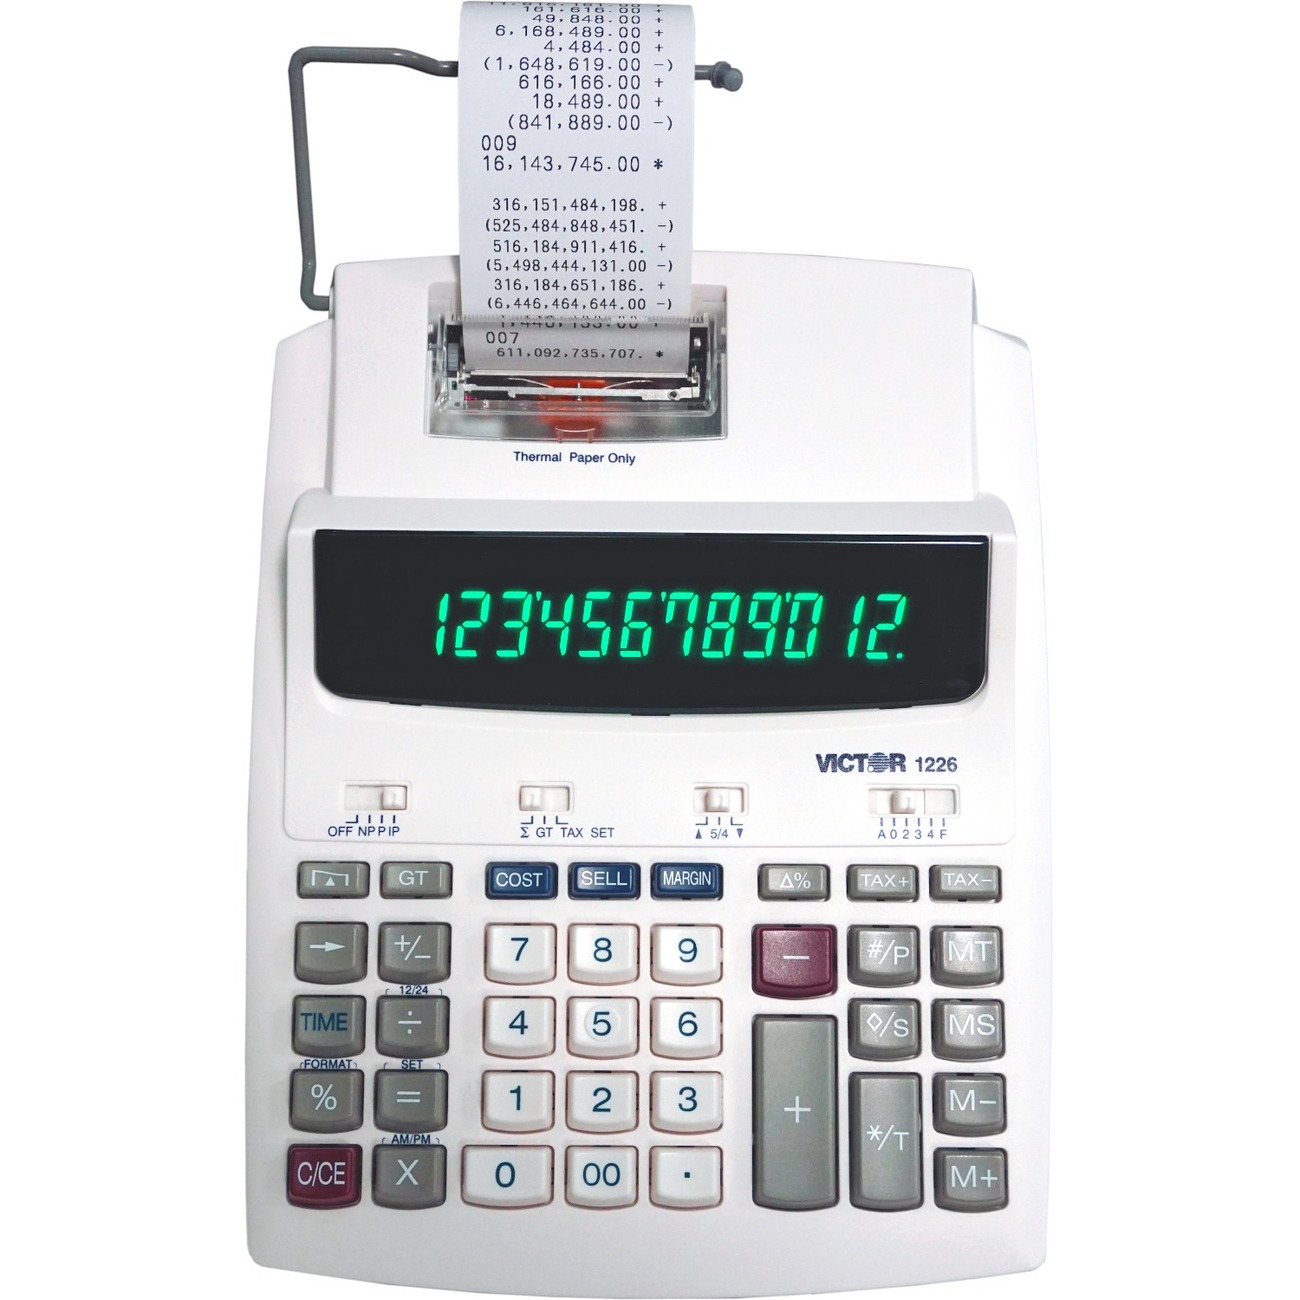 Victor Technology 1226 Thermal Printing Calculator, 12-Digit Display, 8.0 LPS Printing Speed, Off-White - image 5 of 6